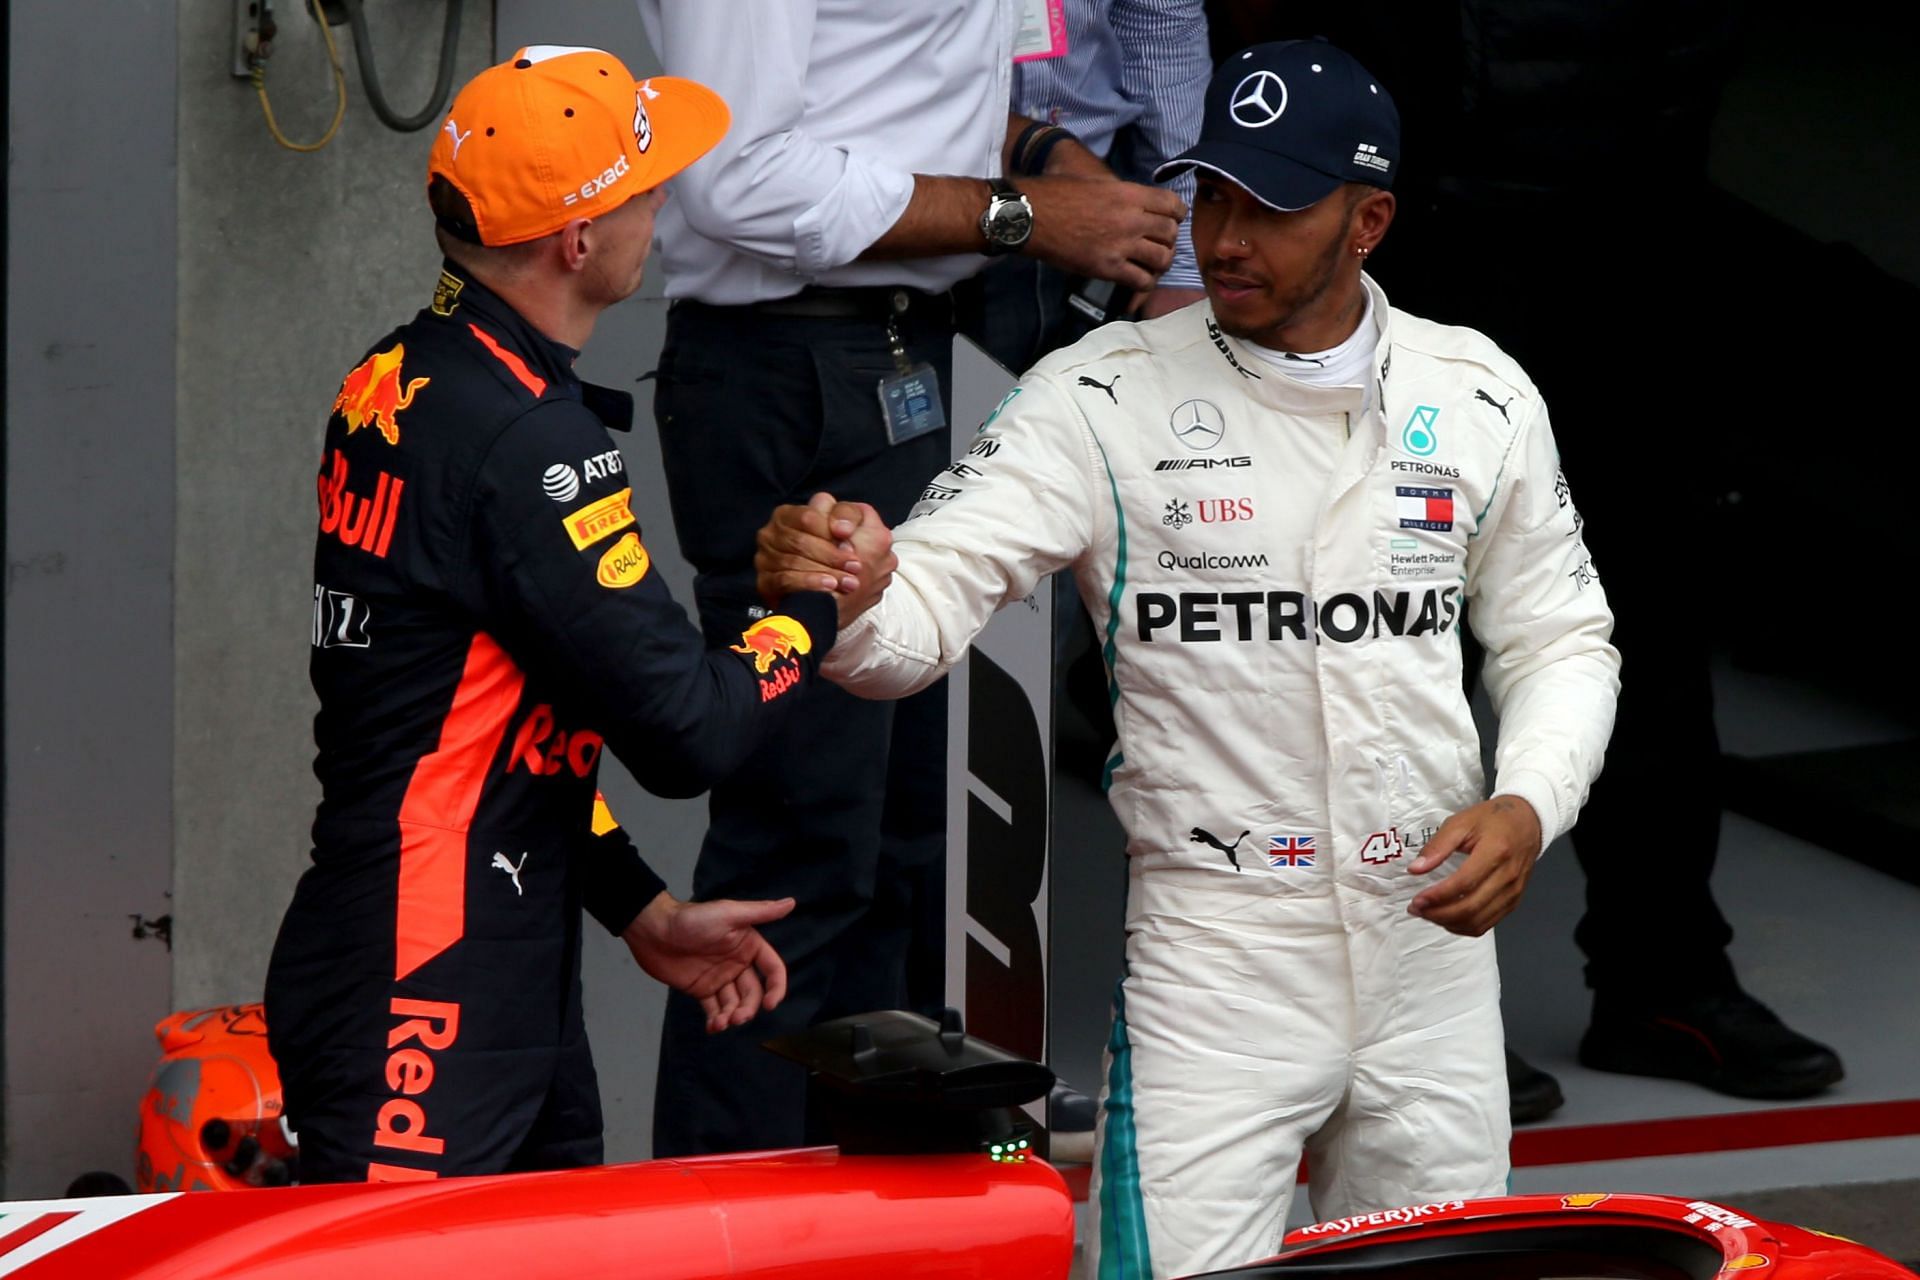 Max Verstappen and Lewis Hamilton will resume their rivalry this season